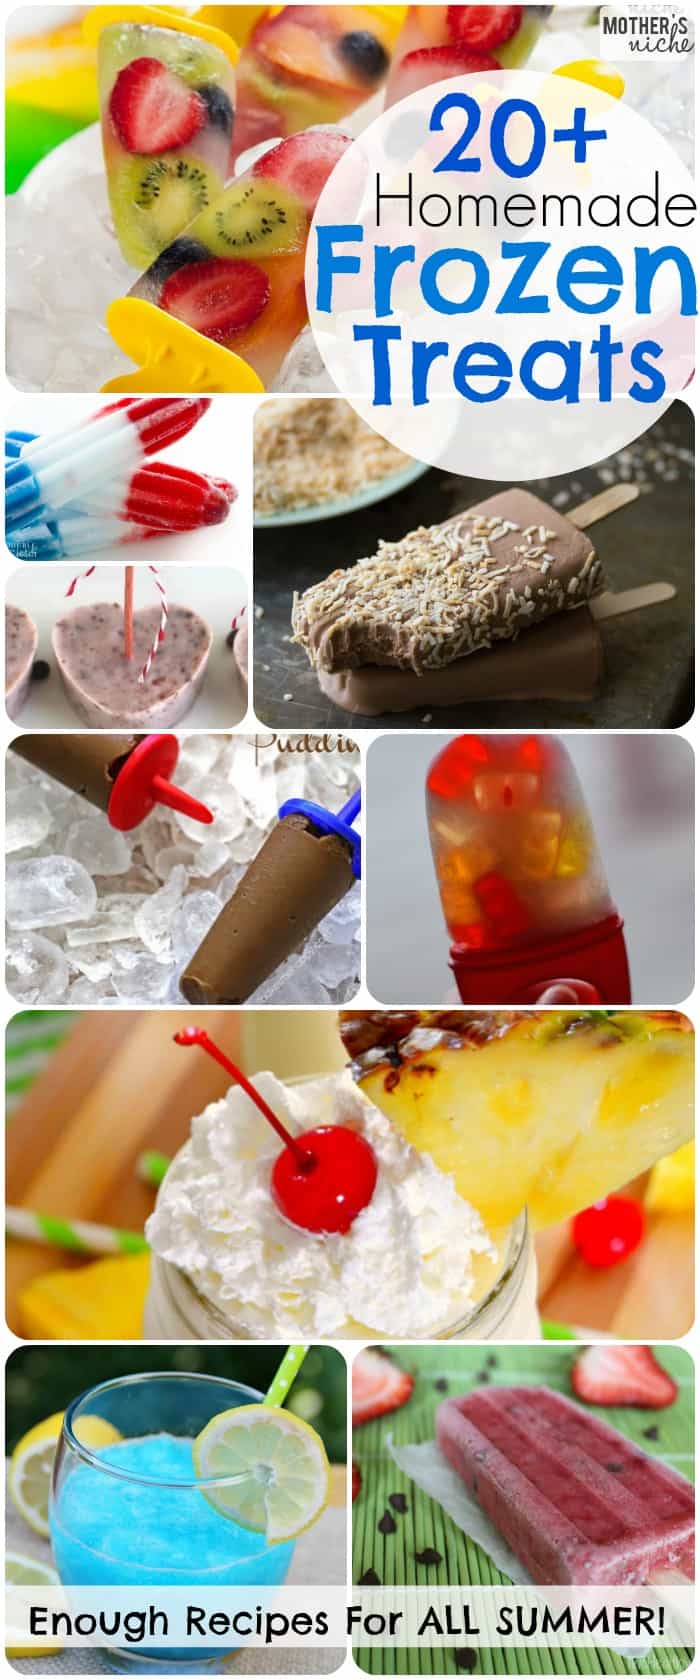 I'm drooling over all these popsicles and frozen treats! Don't think I can wait until summer!